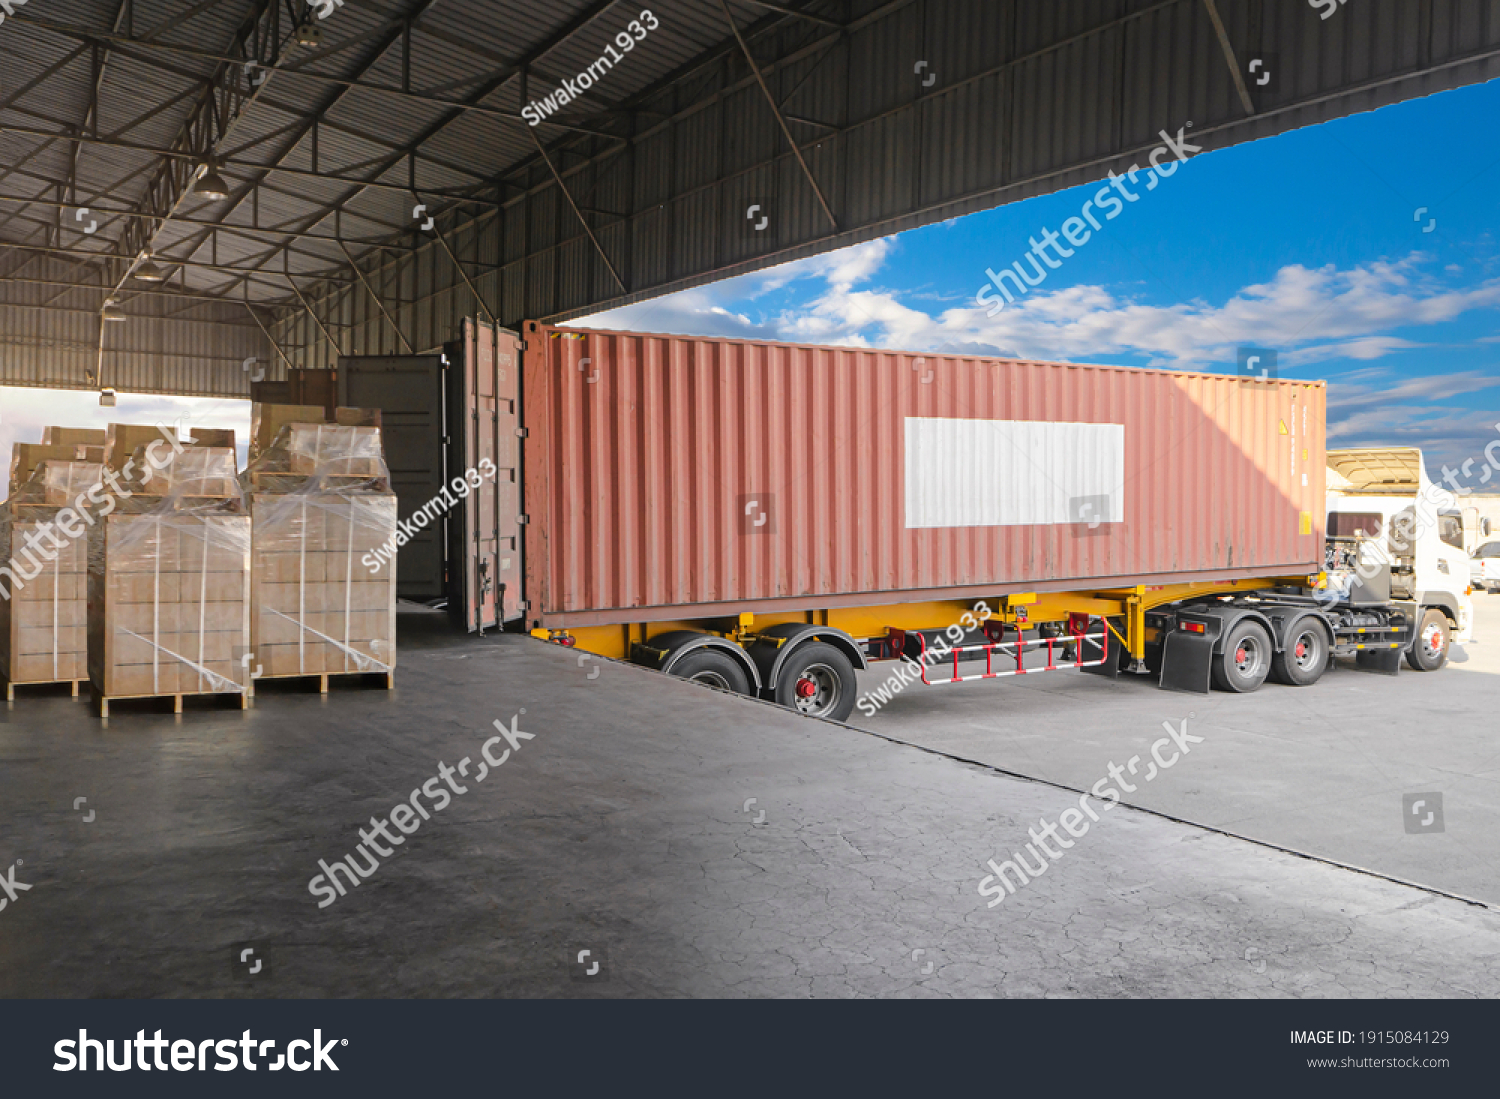 Industry Cargo Freight Trucks Transport and Logistics. Trailer Container Truck Parked Loading Package Boxes at the Warehouse. Supply Chain. Distribution Warehouse Center. Shipping Shipment Cargo. #1915084129